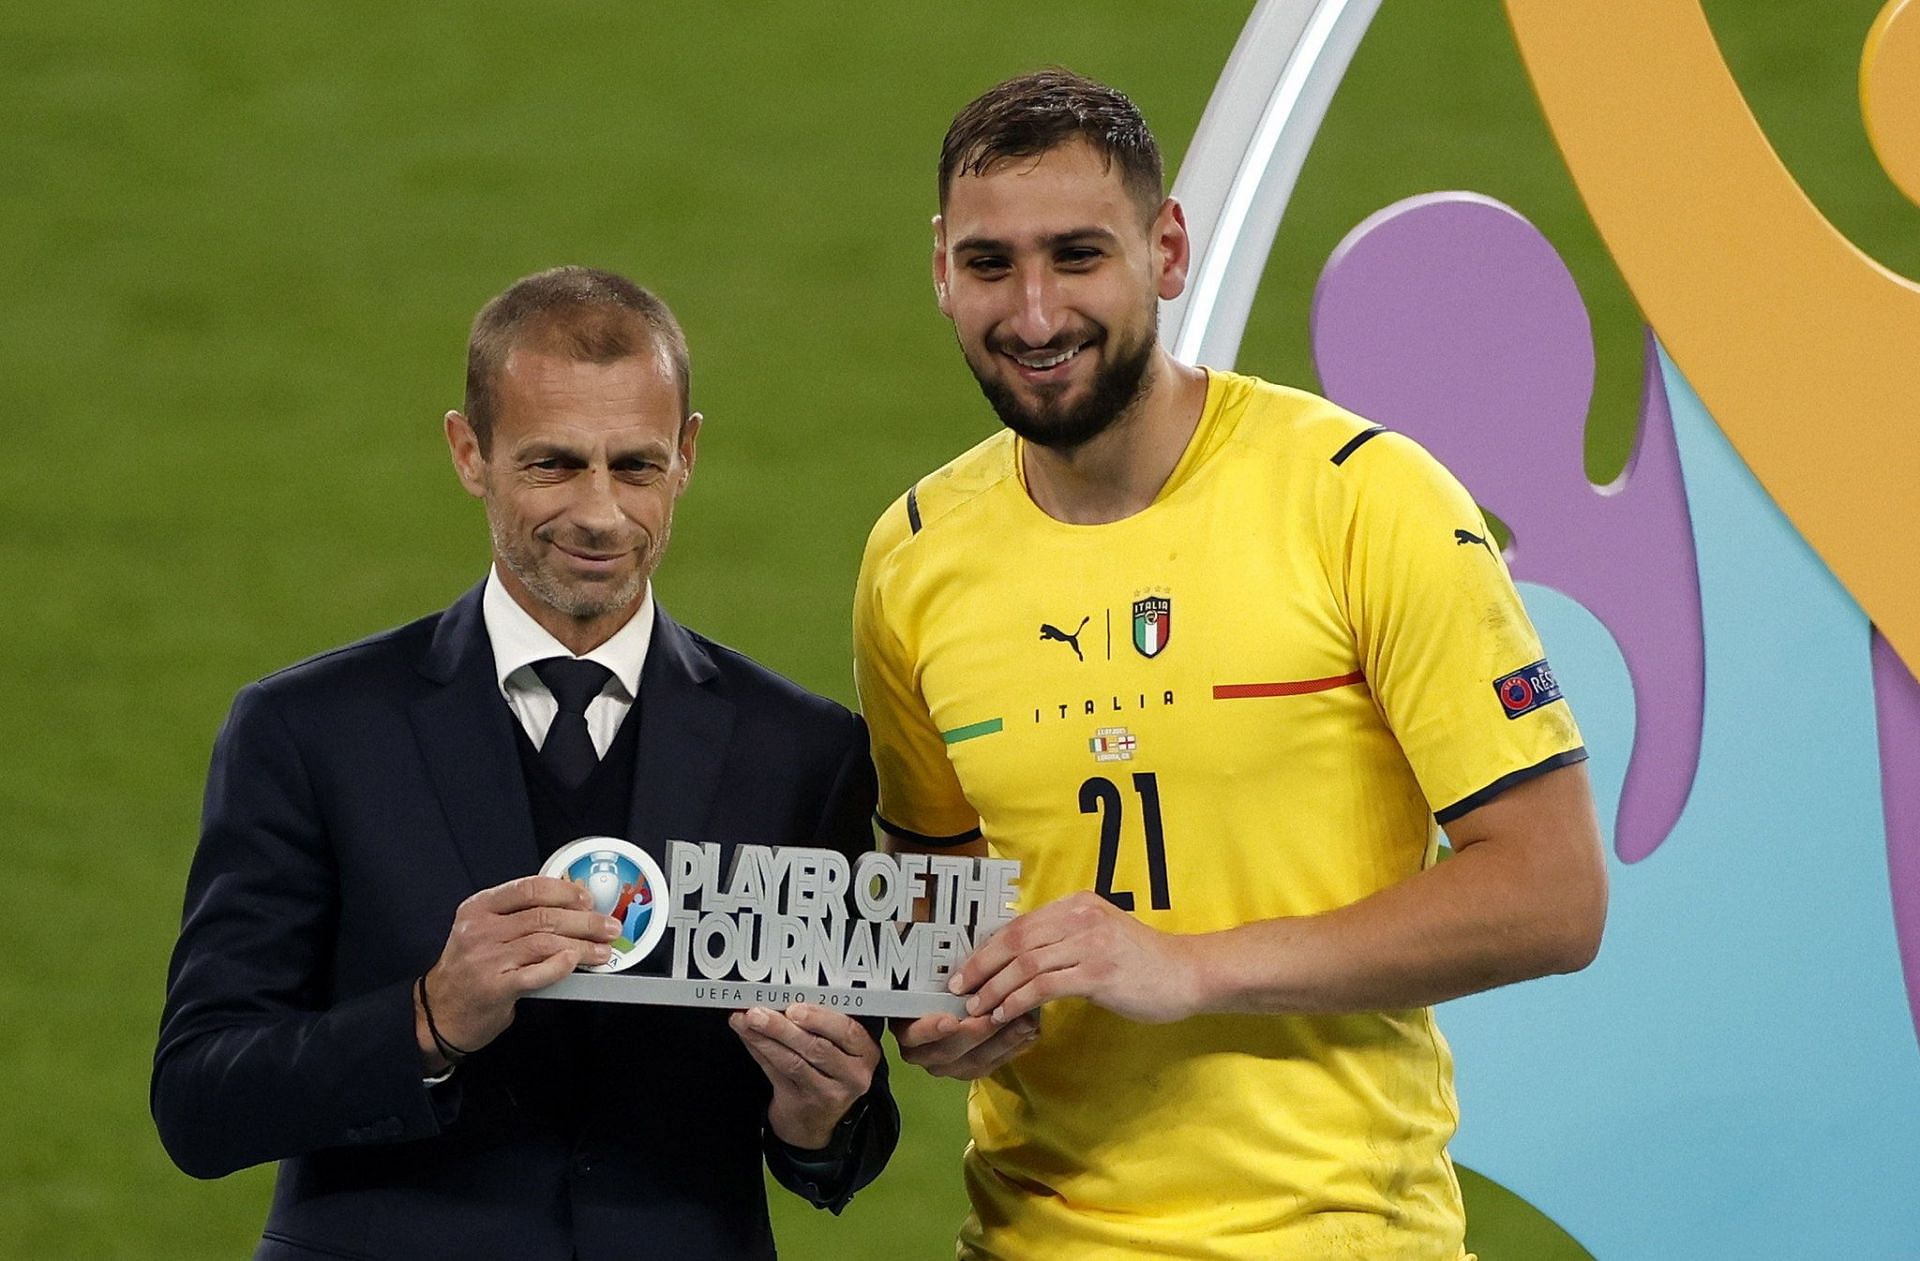 The 22-year-old won the Euro 2020 with Italy